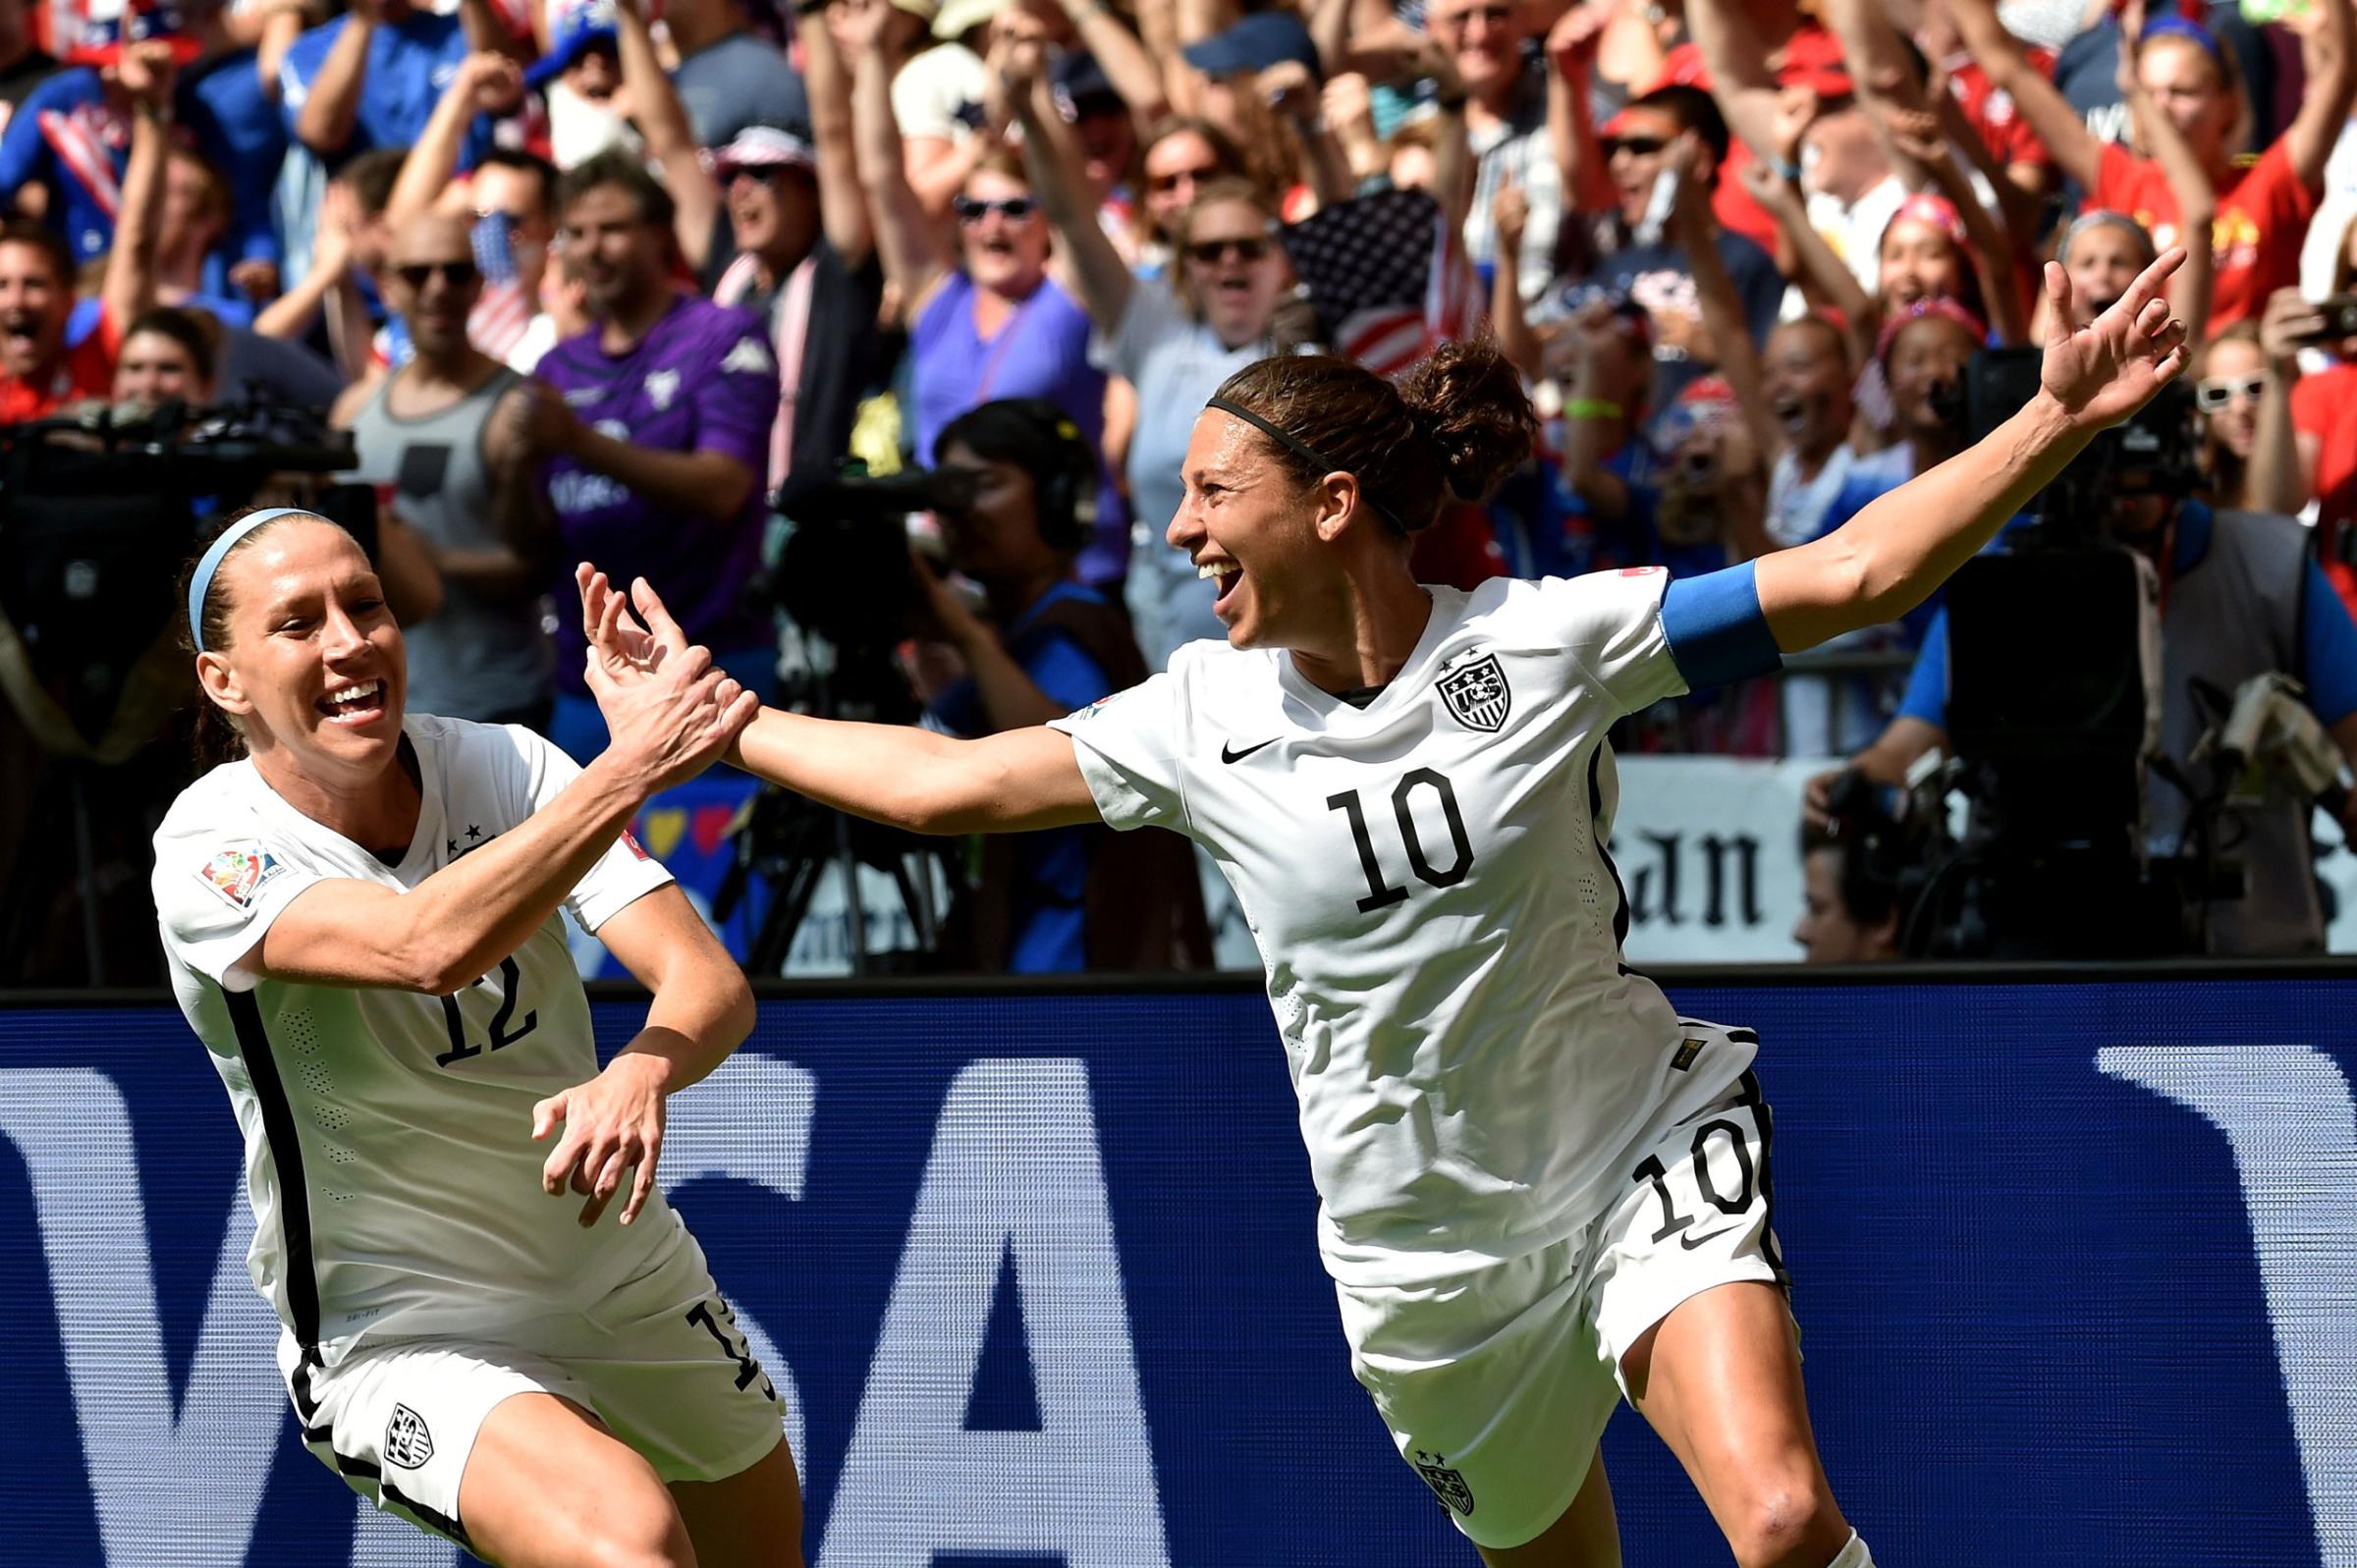 Lauren Holiday #12 and Carli Lloyd #10 of the United States celebrate with teammates after Lloyd scores her second goal against Japan in the FIFA Women's World Cup Canada 2015 Final at BC Place Stadium on July 5, 2015 in Vancouver, Canada. (Photo by Rich Lam/Getty Images)